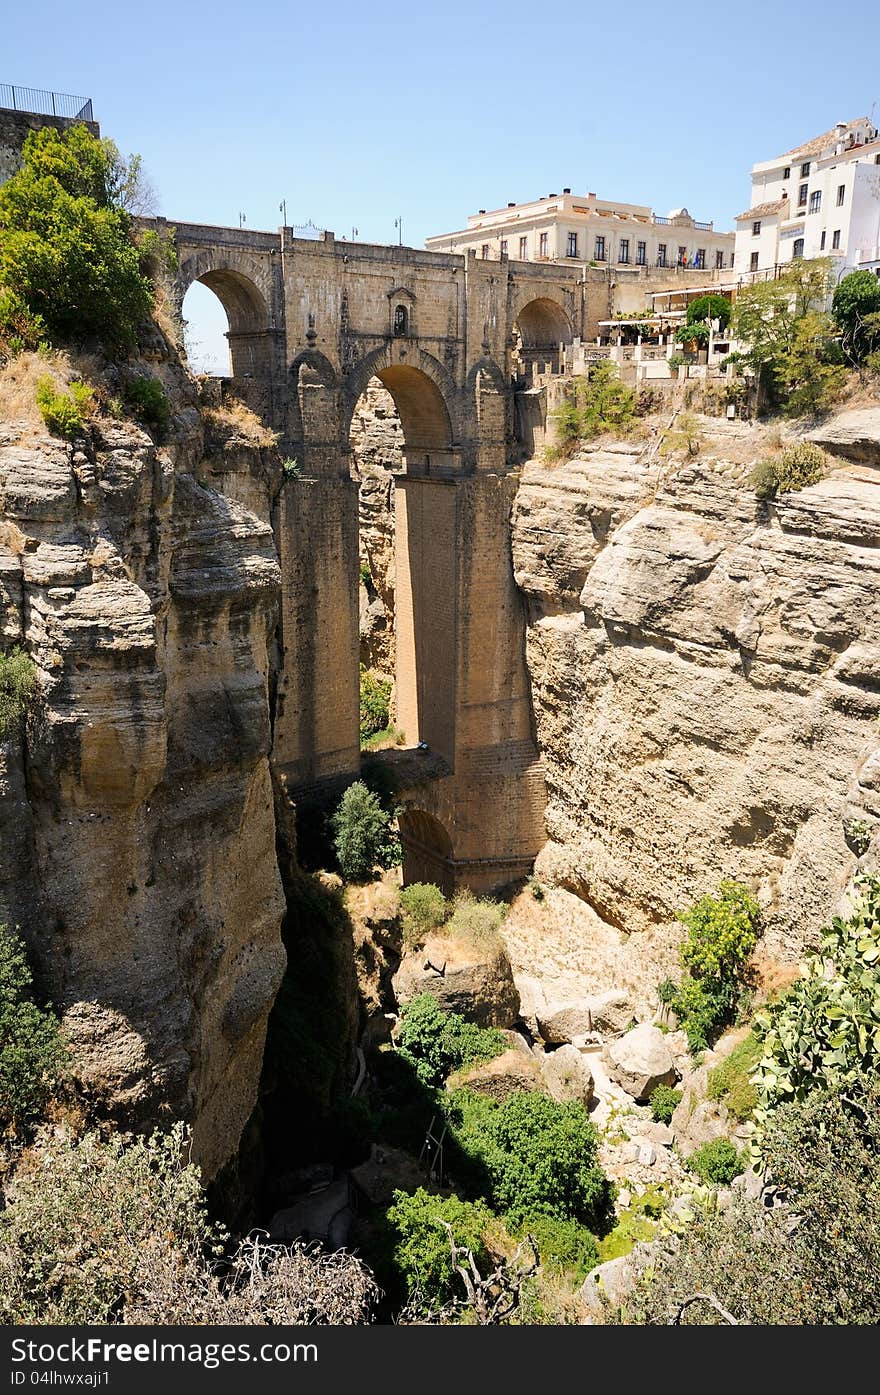 New bridge in Ronda, one of the famous white villages in Málaga, Andalusia, Spain. New bridge in Ronda, one of the famous white villages in Málaga, Andalusia, Spain